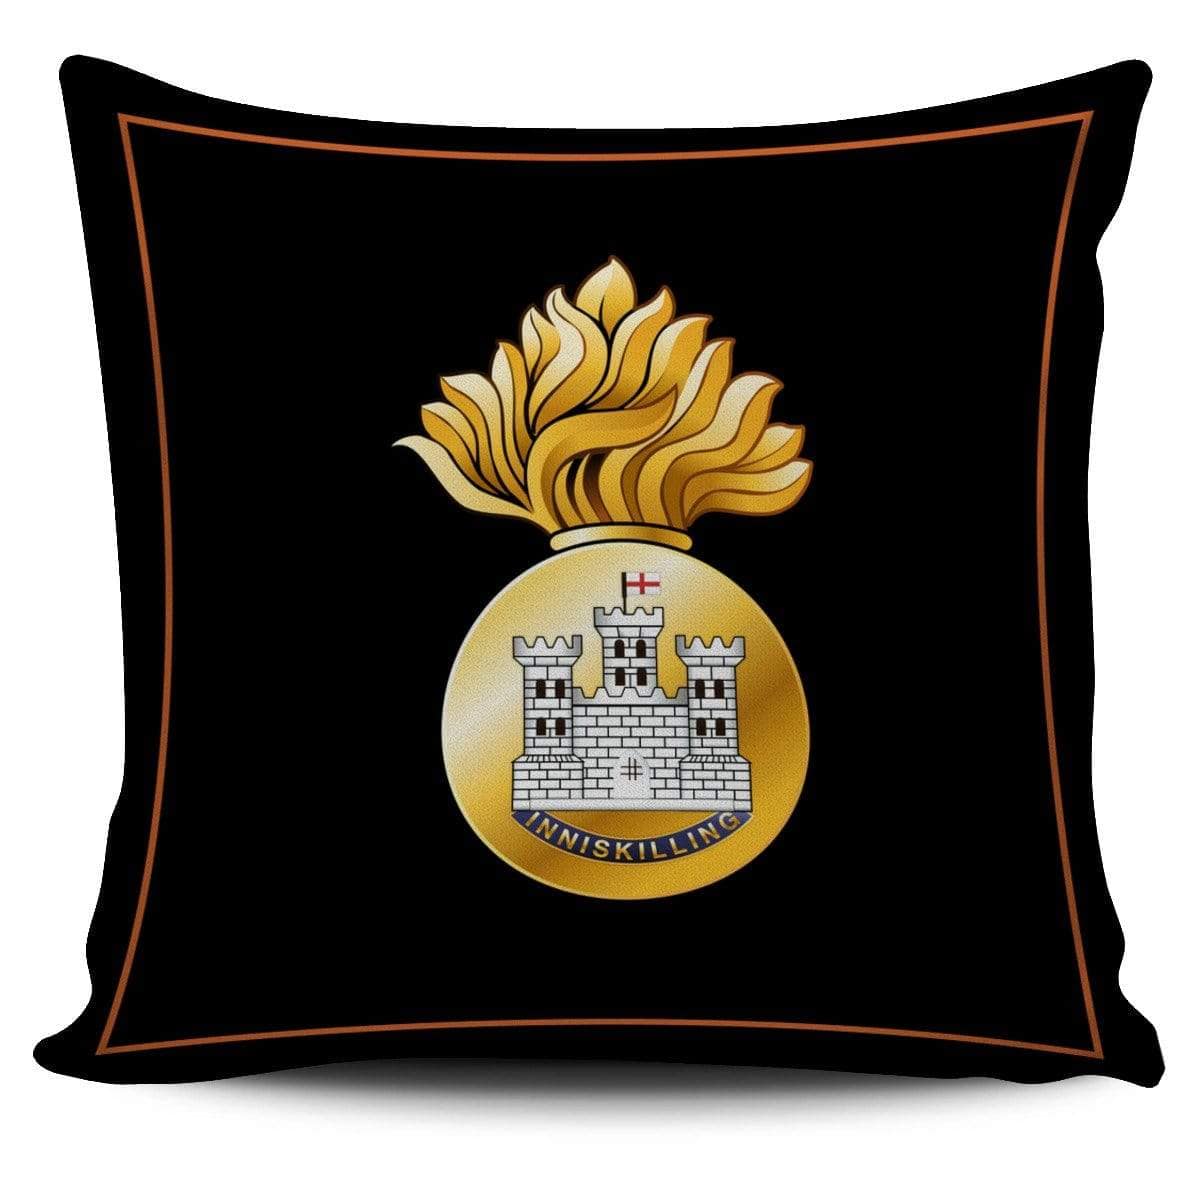 cushion cover Royal Inniskilling Fusiliers Cushion Cover Royal Inniskilling Fusiliers Cushion Cover